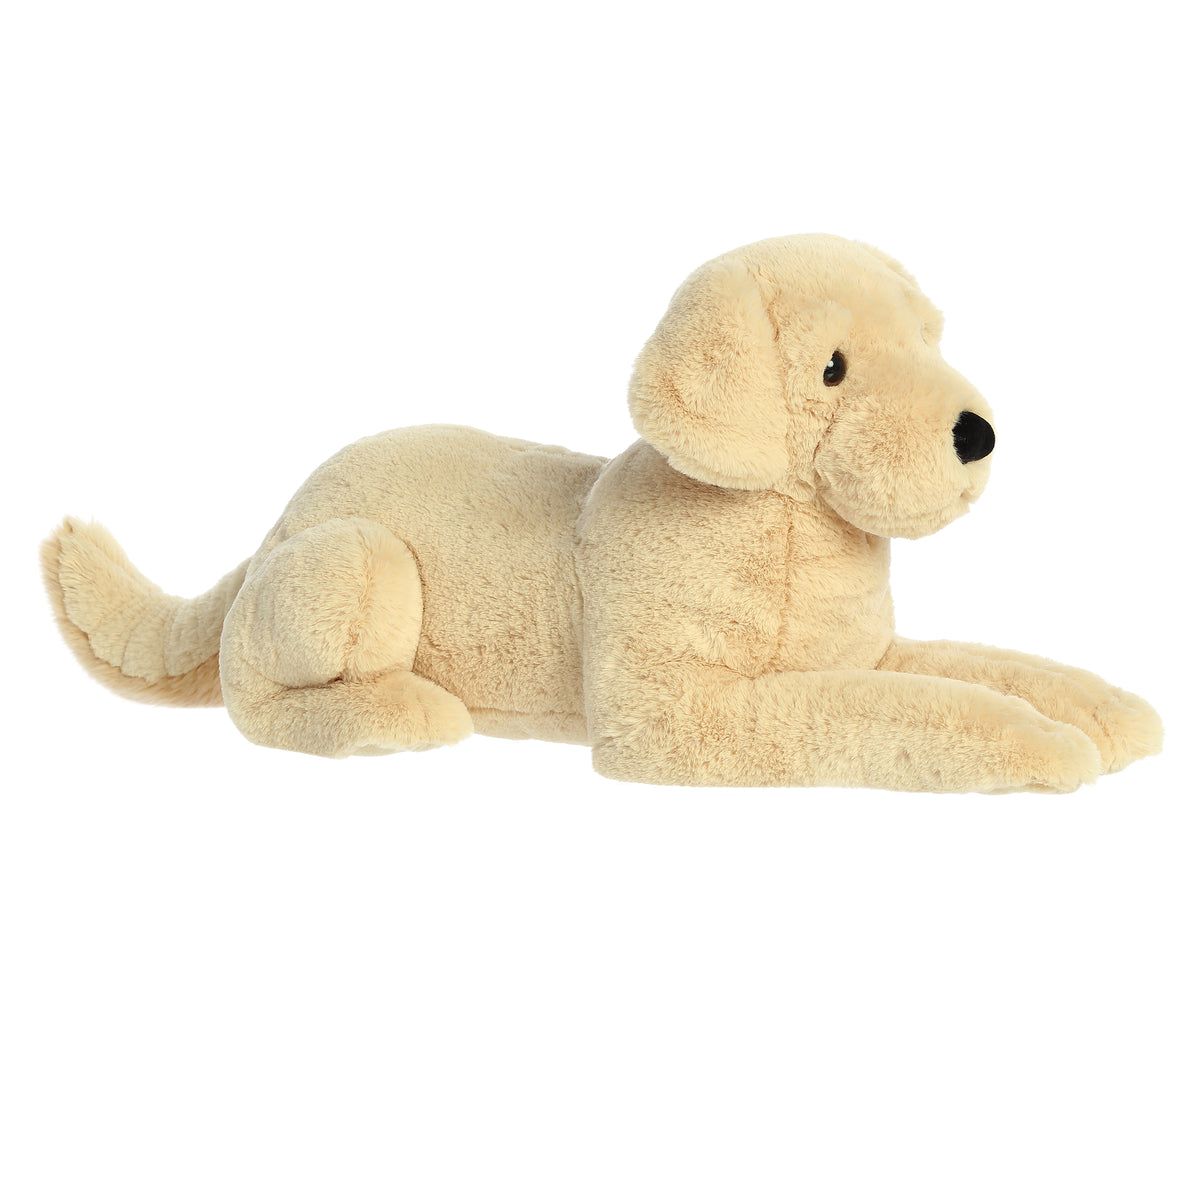 A large golden-furred plush pup with floppy ears from Aurora's Super Flopsie collection, in a resting pose.